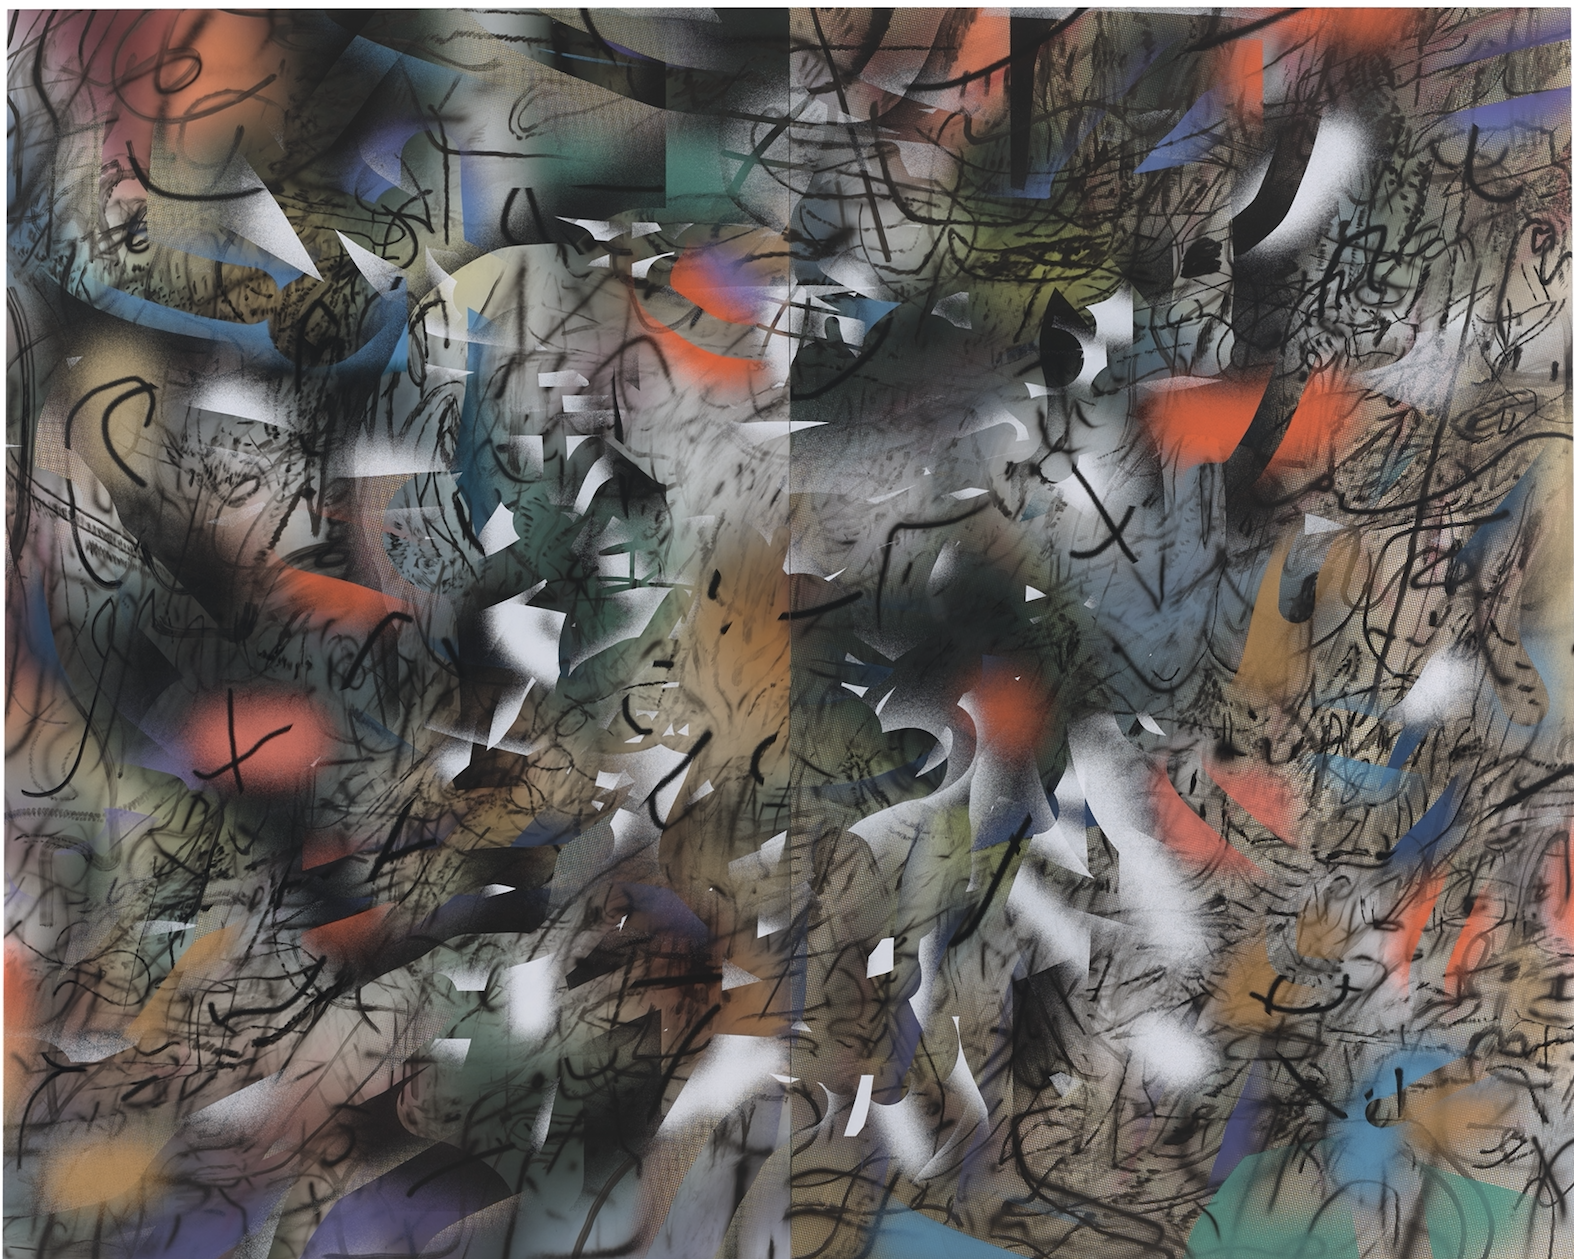 A photograph of an abstract painting. The painting is dark with sections that are black, white, bright orange, blue, purple and green.